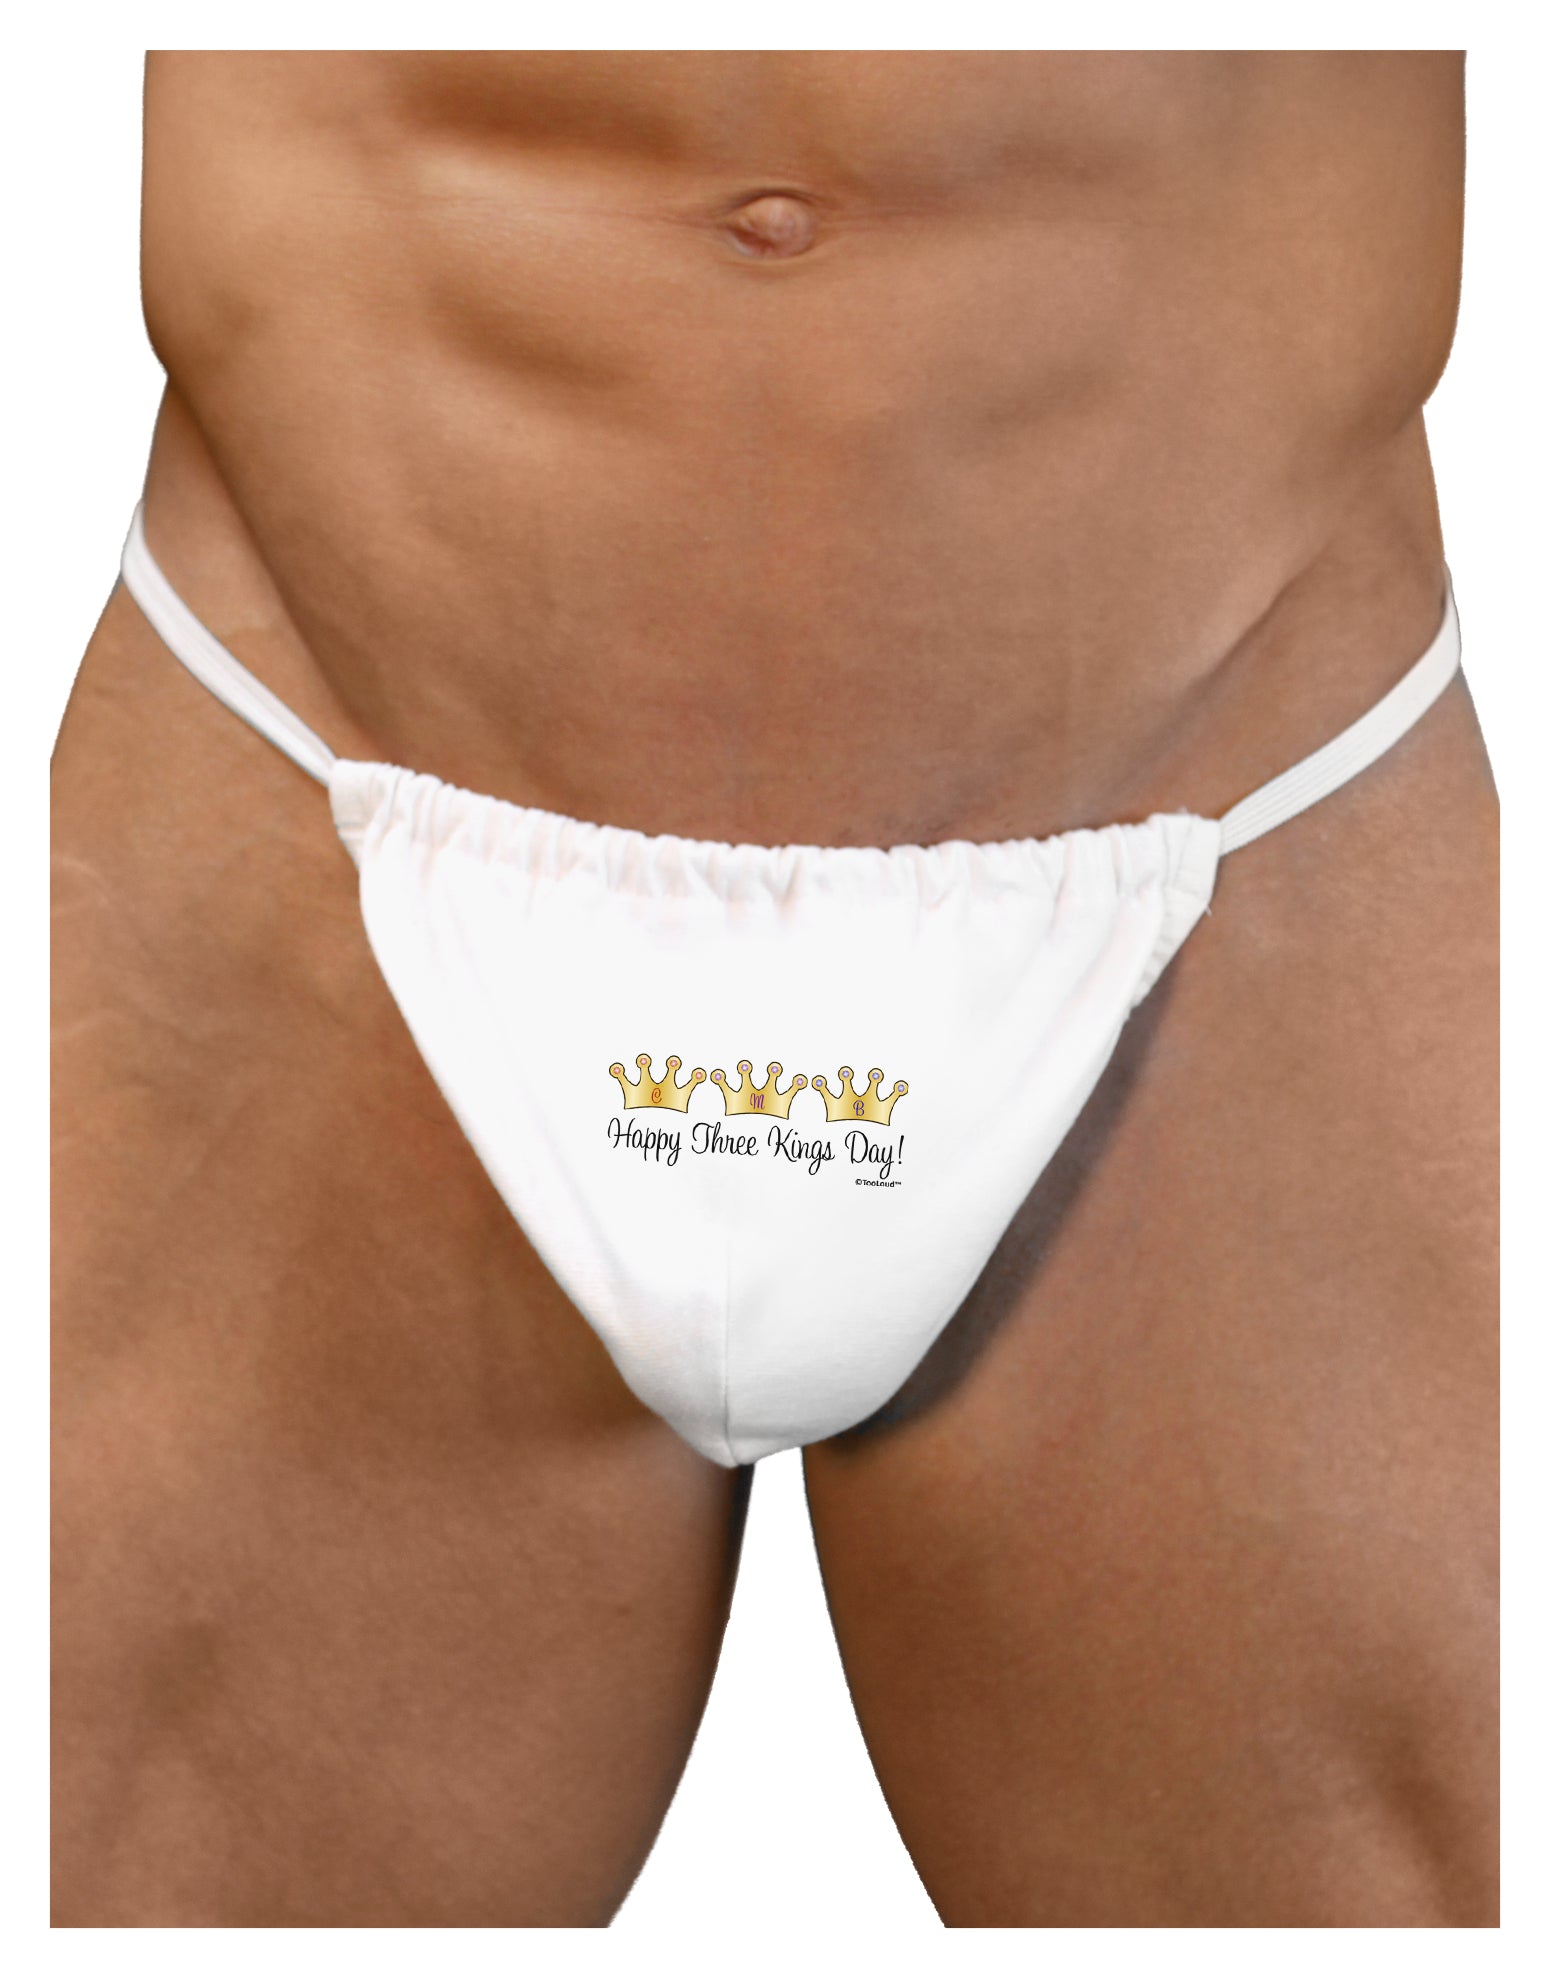 Are Men's G Strings Really That Comfortable?